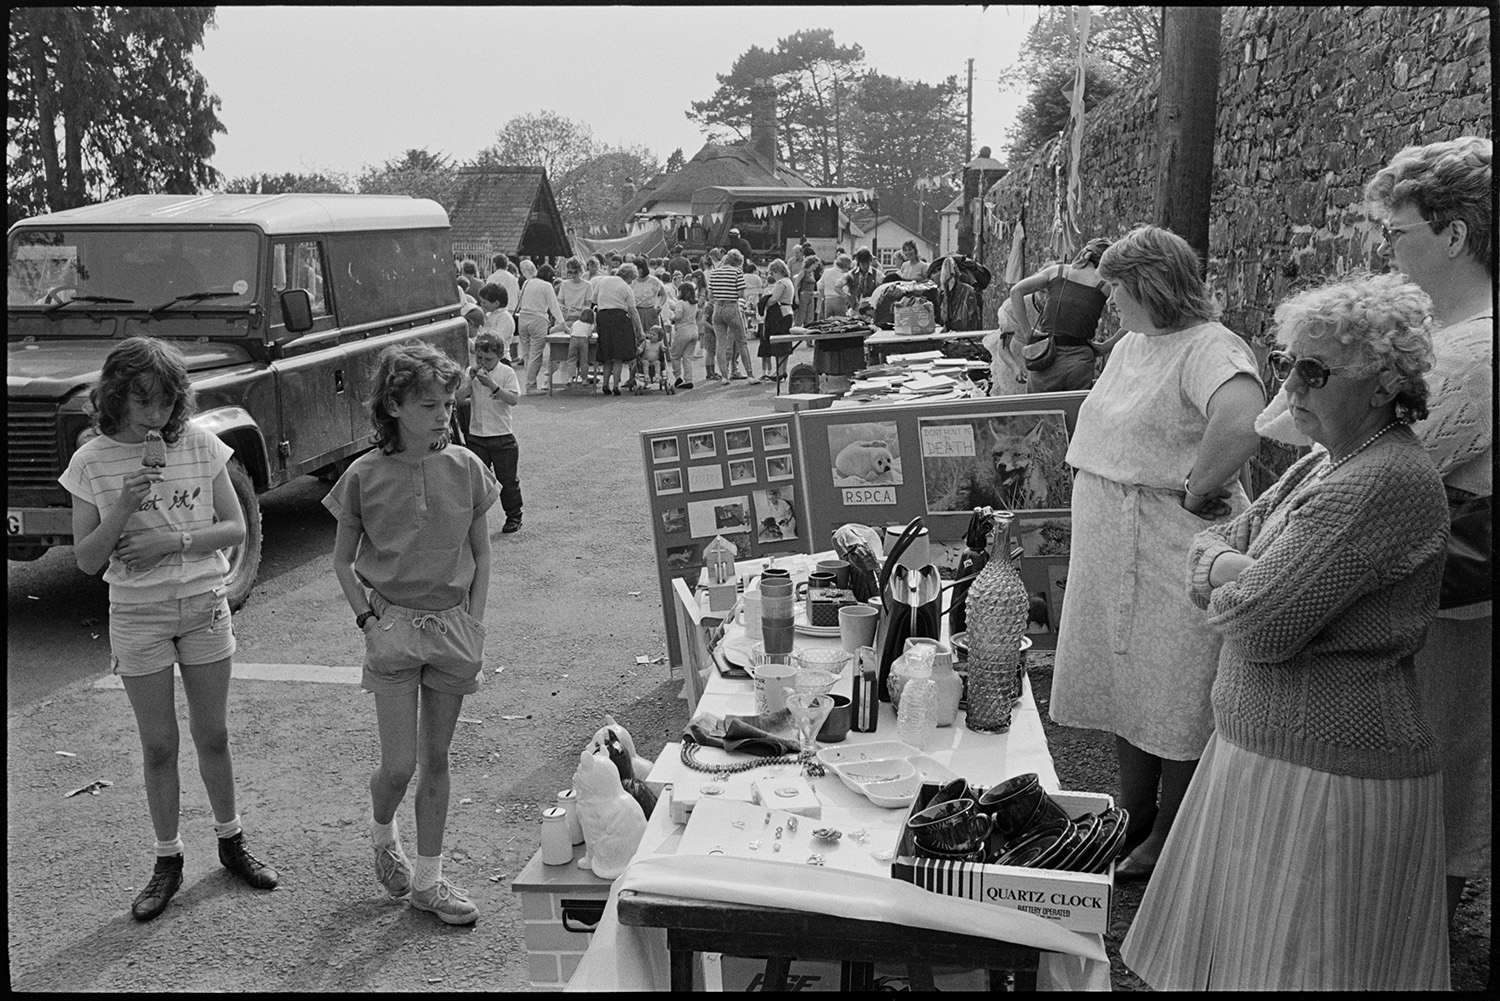 People at Chulmleigh Primary School Fete. Children are looking at a bric-a-brac stall for the RSPCA being run by three women. A parked Land Rover is opposite and a crowd of people are looking at stalls in the background.